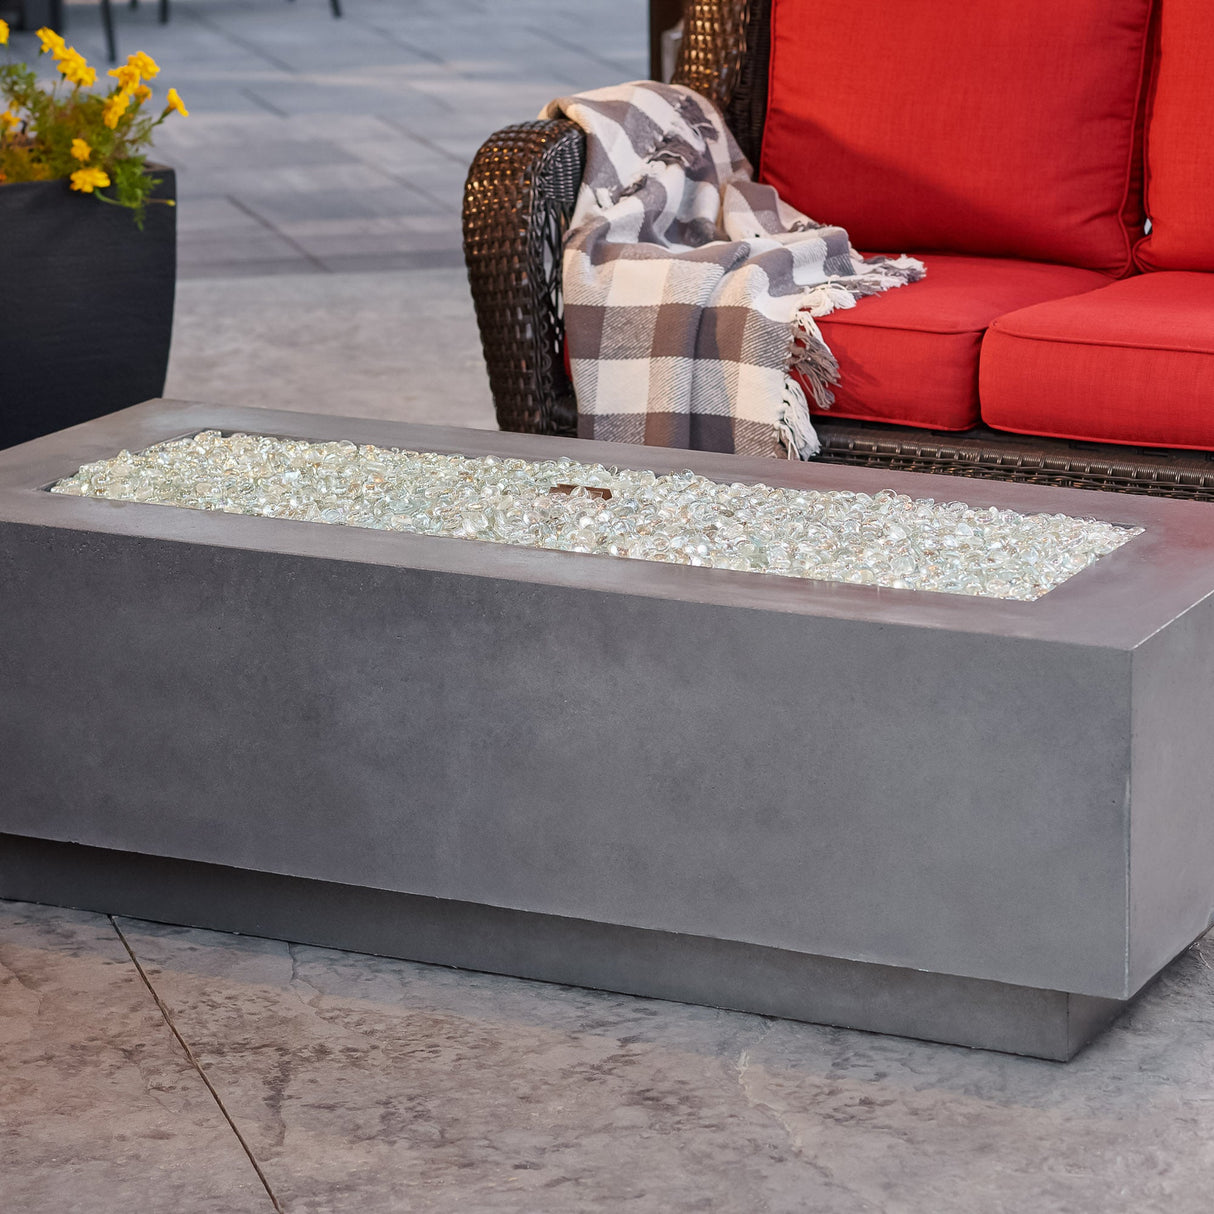 A close up of fire gems on the burner of a Midnight Mist Cove Linear Gas Fire Pit Table 54"